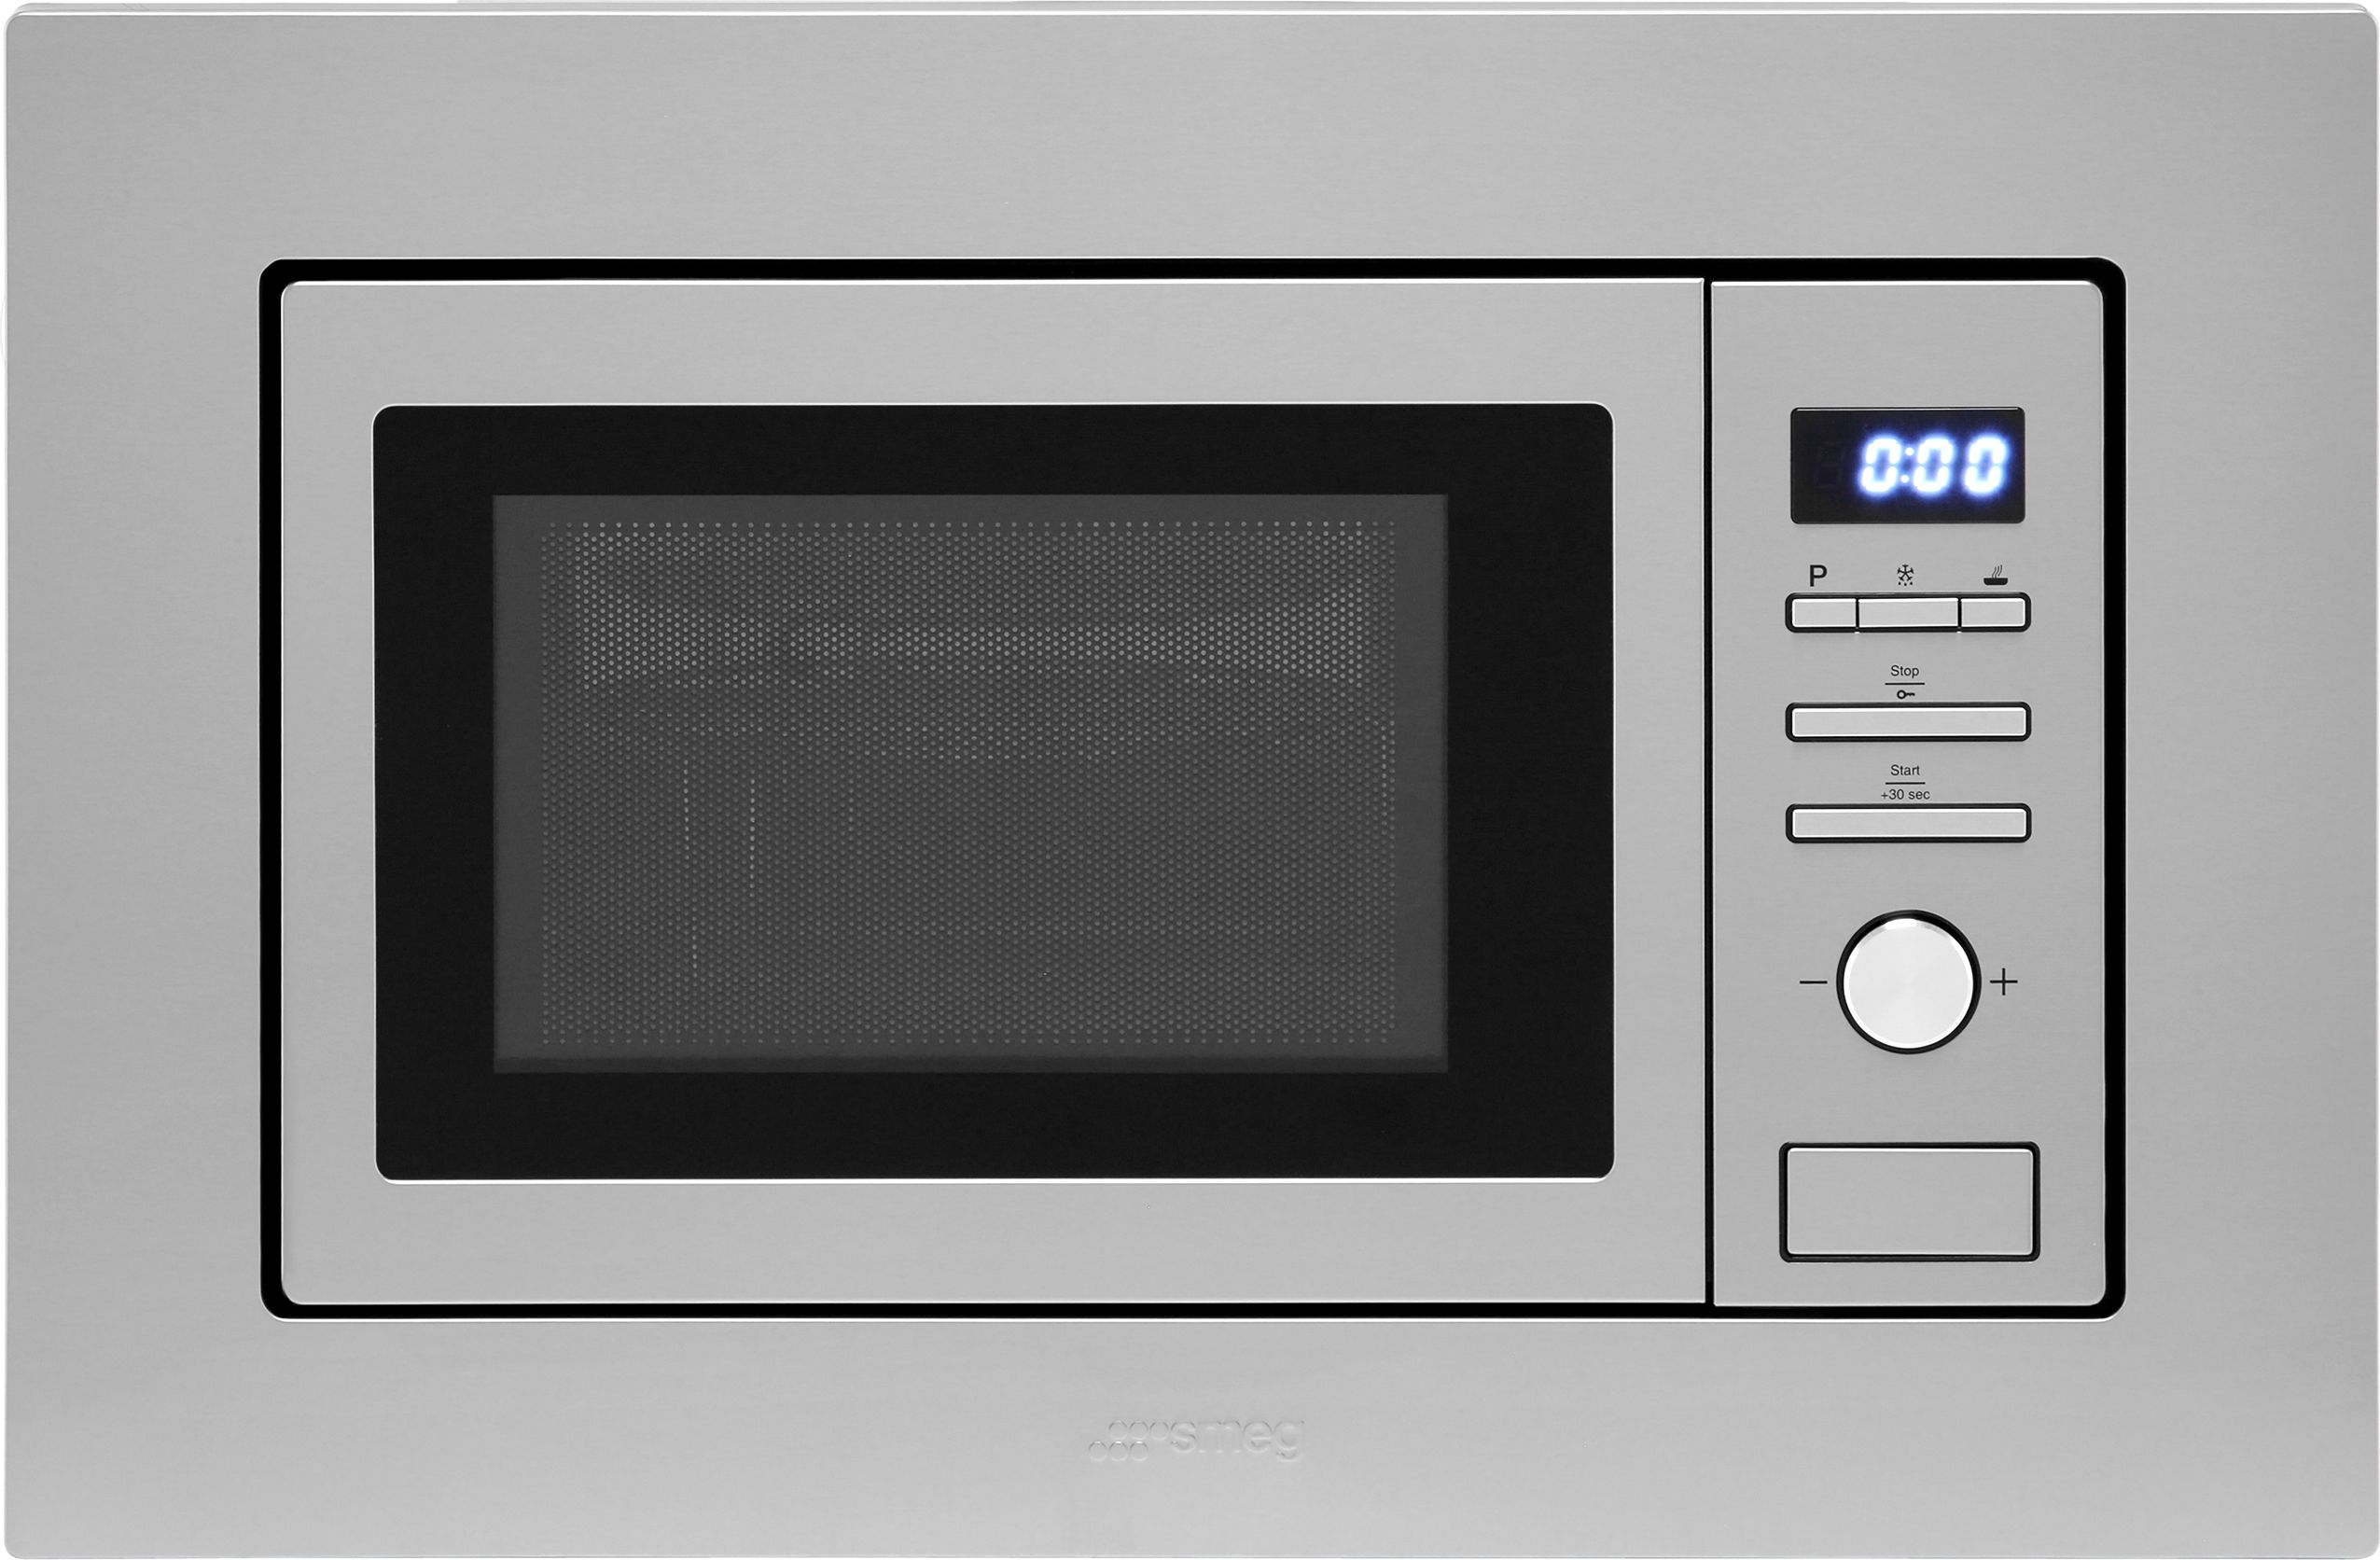 Smeg FMI017X 39cm tall, 60cm wide, Built In Compact Microwave - Stainless Steel, Stainless Steel